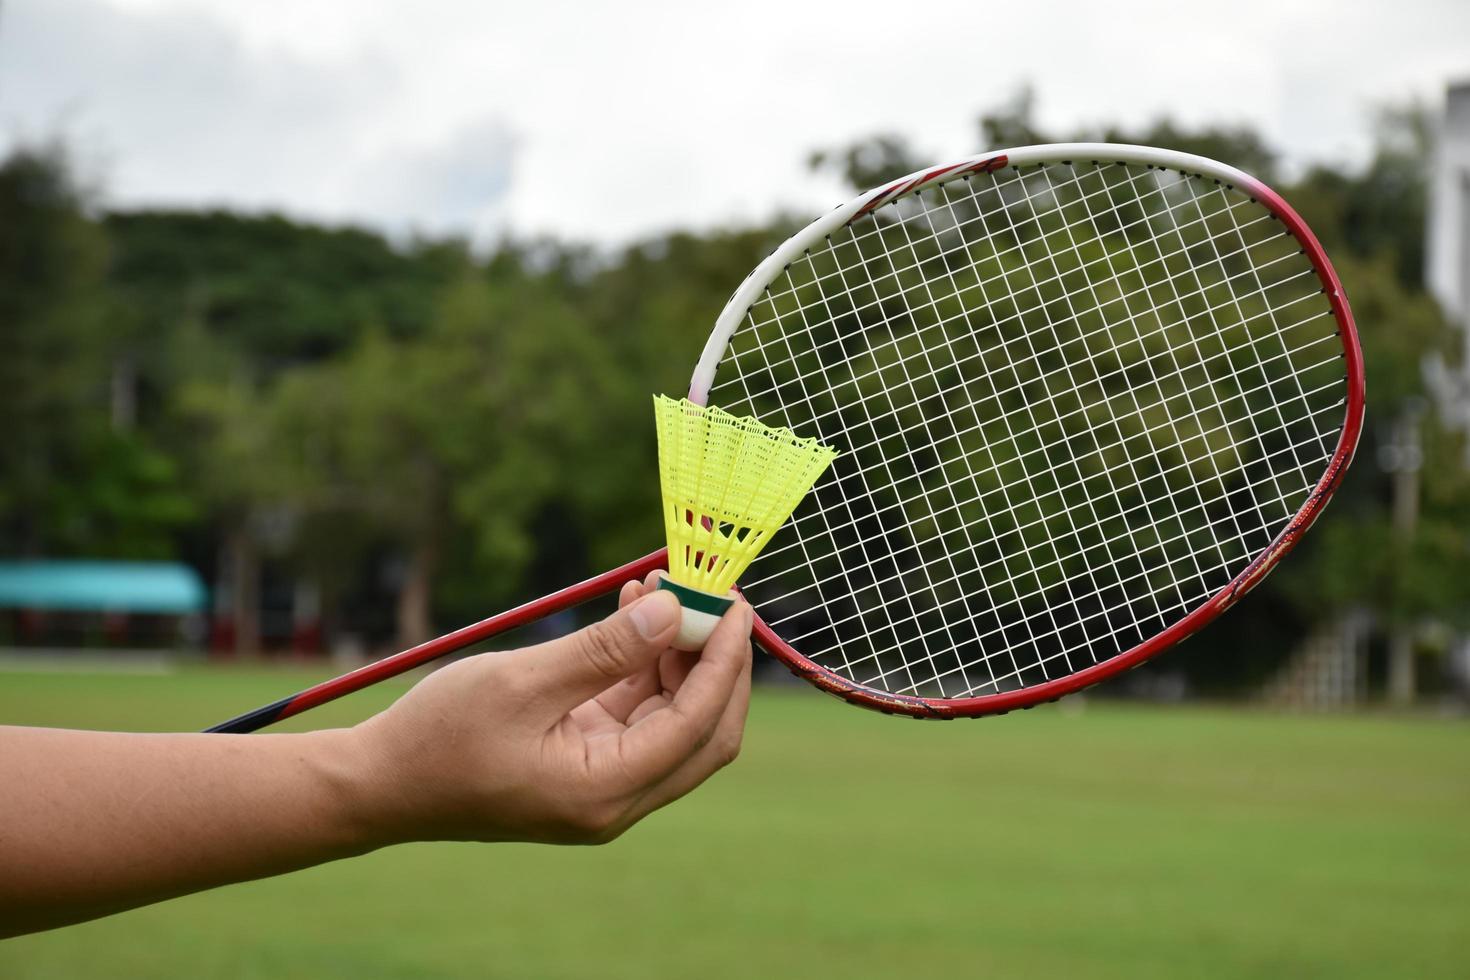 Badminton racket and badminton shuttlecocks holding in hands for outdoor playing, soft and selective focus on string and racket, concept for outdoor activity. photo